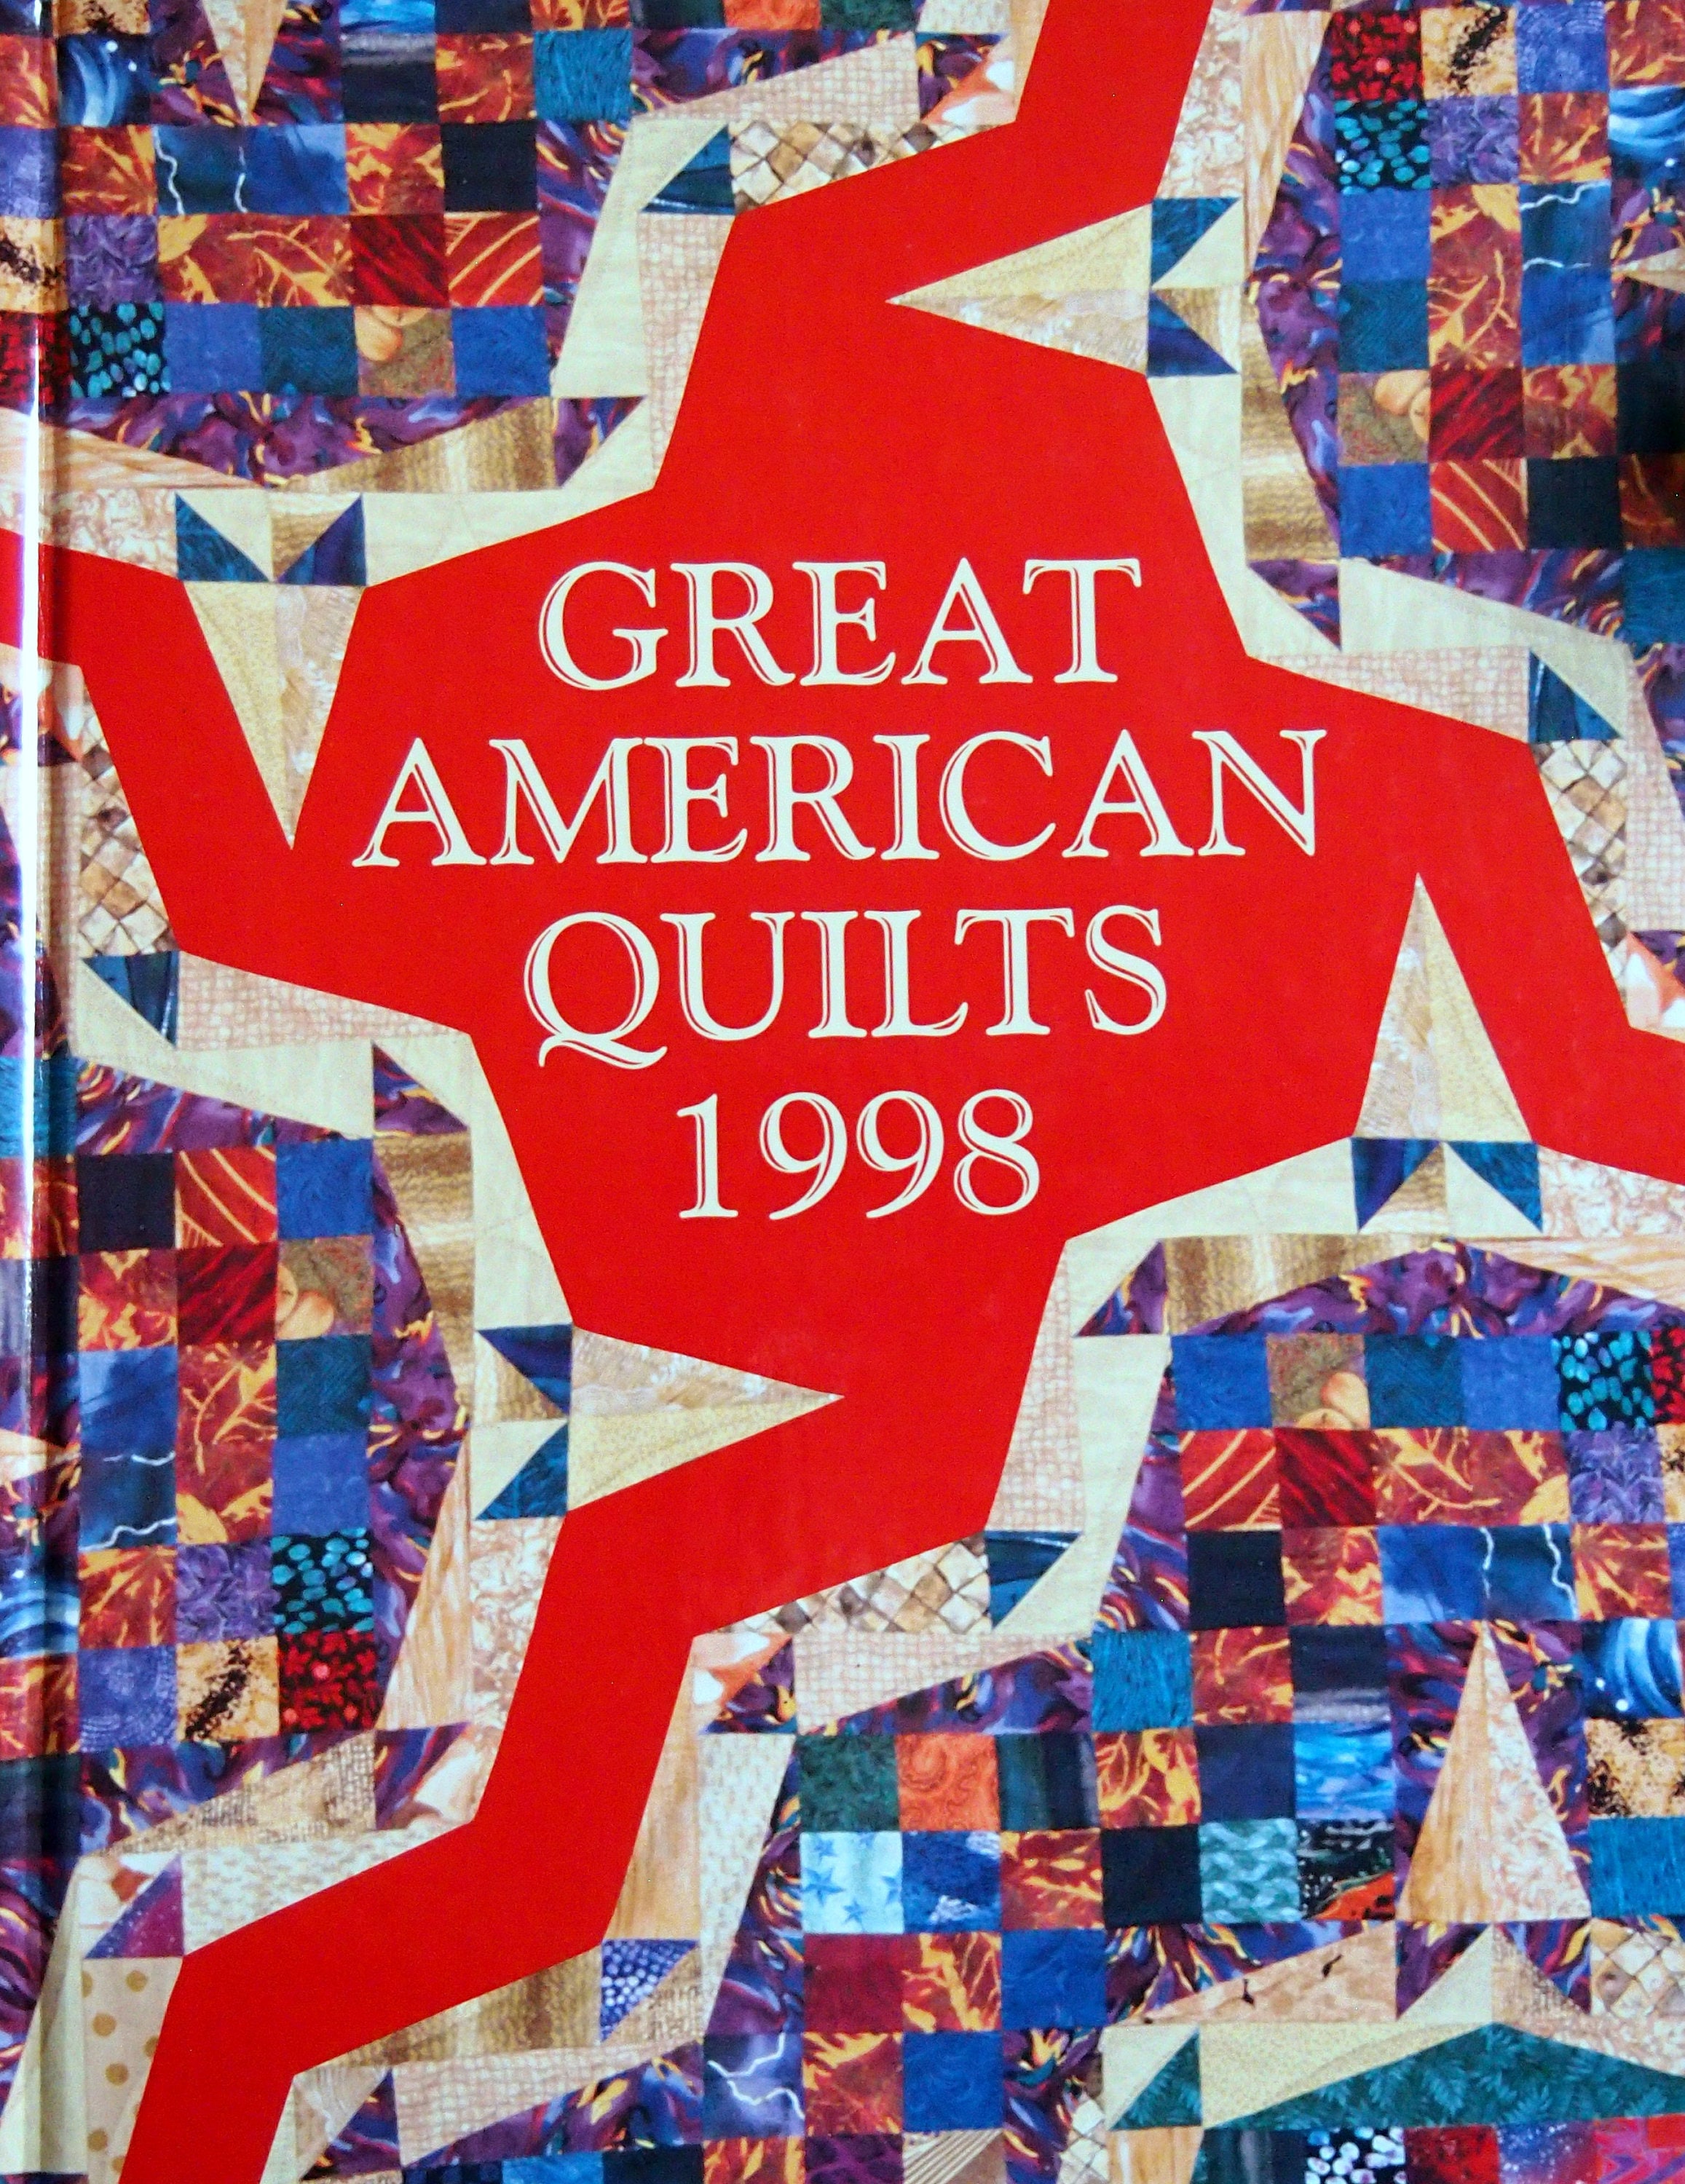 Great American Quilts - Quilt Pattern Books - Hardback -  1987-1989,1991-1994